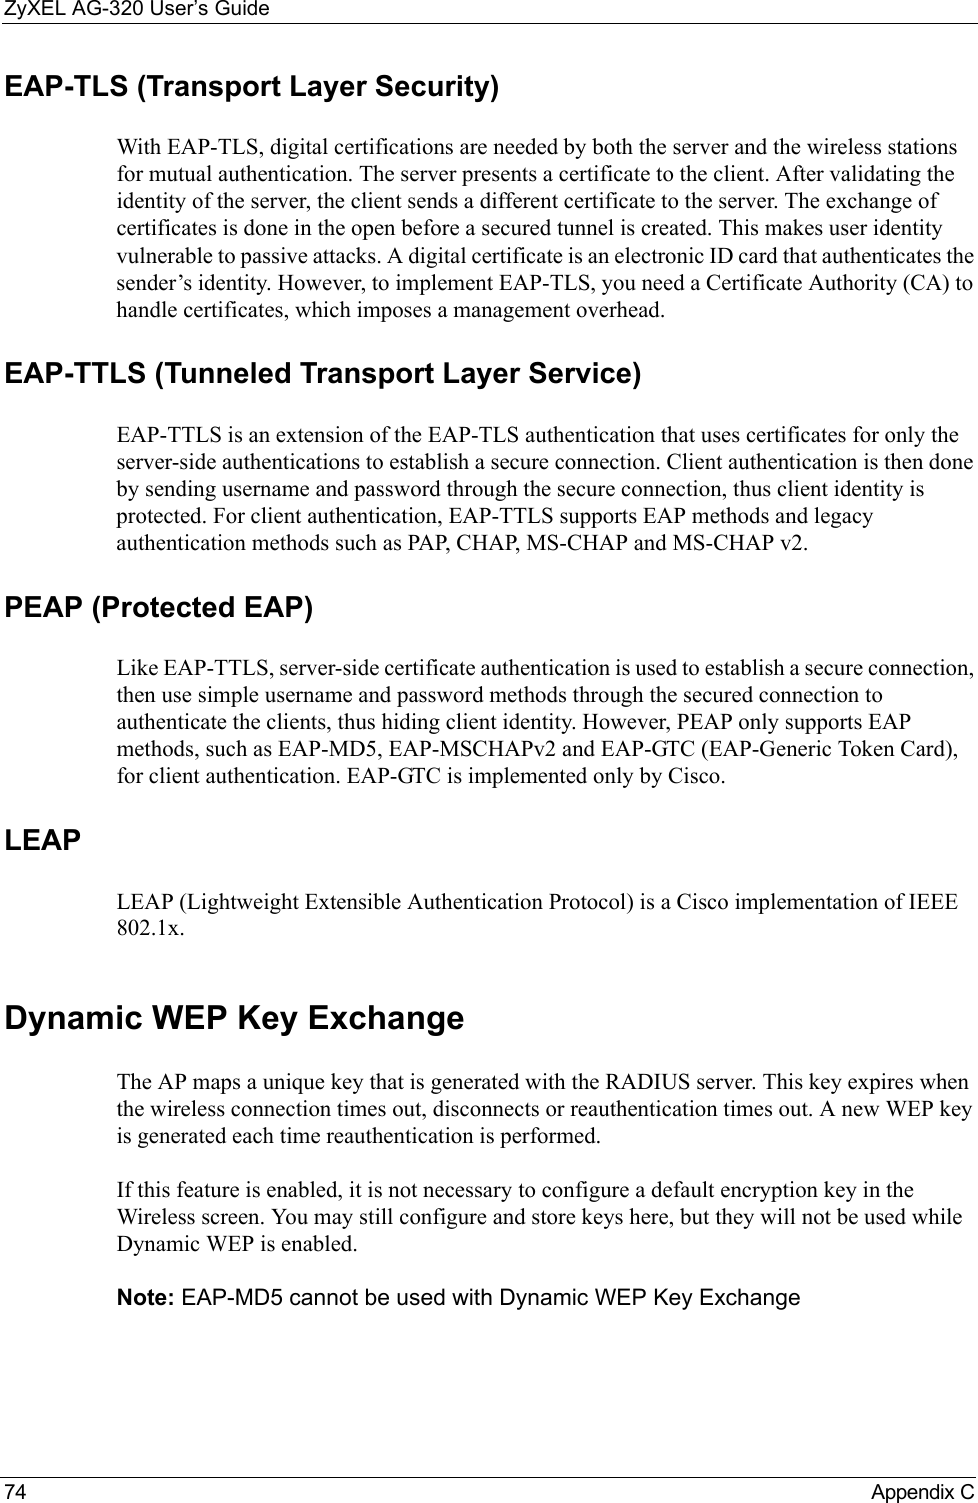 ZyXEL AG-320 User’s Guide74 Appendix CEAP-TLS (Transport Layer Security)With EAP-TLS, digital certifications are needed by both the server and the wireless stations for mutual authentication. The server presents a certificate to the client. After validating the identity of the server, the client sends a different certificate to the server. The exchange of certificates is done in the open before a secured tunnel is created. This makes user identity vulnerable to passive attacks. A digital certificate is an electronic ID card that authenticates the sender’s identity. However, to implement EAP-TLS, you need a Certificate Authority (CA) to handle certificates, which imposes a management overhead. EAP-TTLS (Tunneled Transport Layer Service) EAP-TTLS is an extension of the EAP-TLS authentication that uses certificates for only the server-side authentications to establish a secure connection. Client authentication is then done by sending username and password through the secure connection, thus client identity is protected. For client authentication, EAP-TTLS supports EAP methods and legacy authentication methods such as PAP, CHAP, MS-CHAP and MS-CHAP v2. PEAP (Protected EAP)   Like EAP-TTLS, server-side certificate authentication is used to establish a secure connection, then use simple username and password methods through the secured connection to authenticate the clients, thus hiding client identity. However, PEAP only supports EAP methods, such as EAP-MD5, EAP-MSCHAPv2 and EAP-GTC (EAP-Generic Token Card), for client authentication. EAP-GTC is implemented only by Cisco.LEAPLEAP (Lightweight Extensible Authentication Protocol) is a Cisco implementation of IEEE 802.1x. Dynamic WEP Key ExchangeThe AP maps a unique key that is generated with the RADIUS server. This key expires when the wireless connection times out, disconnects or reauthentication times out. A new WEP key is generated each time reauthentication is performed.If this feature is enabled, it is not necessary to configure a default encryption key in the Wireless screen. You may still configure and store keys here, but they will not be used while Dynamic WEP is enabled.Note: EAP-MD5 cannot be used with Dynamic WEP Key Exchange